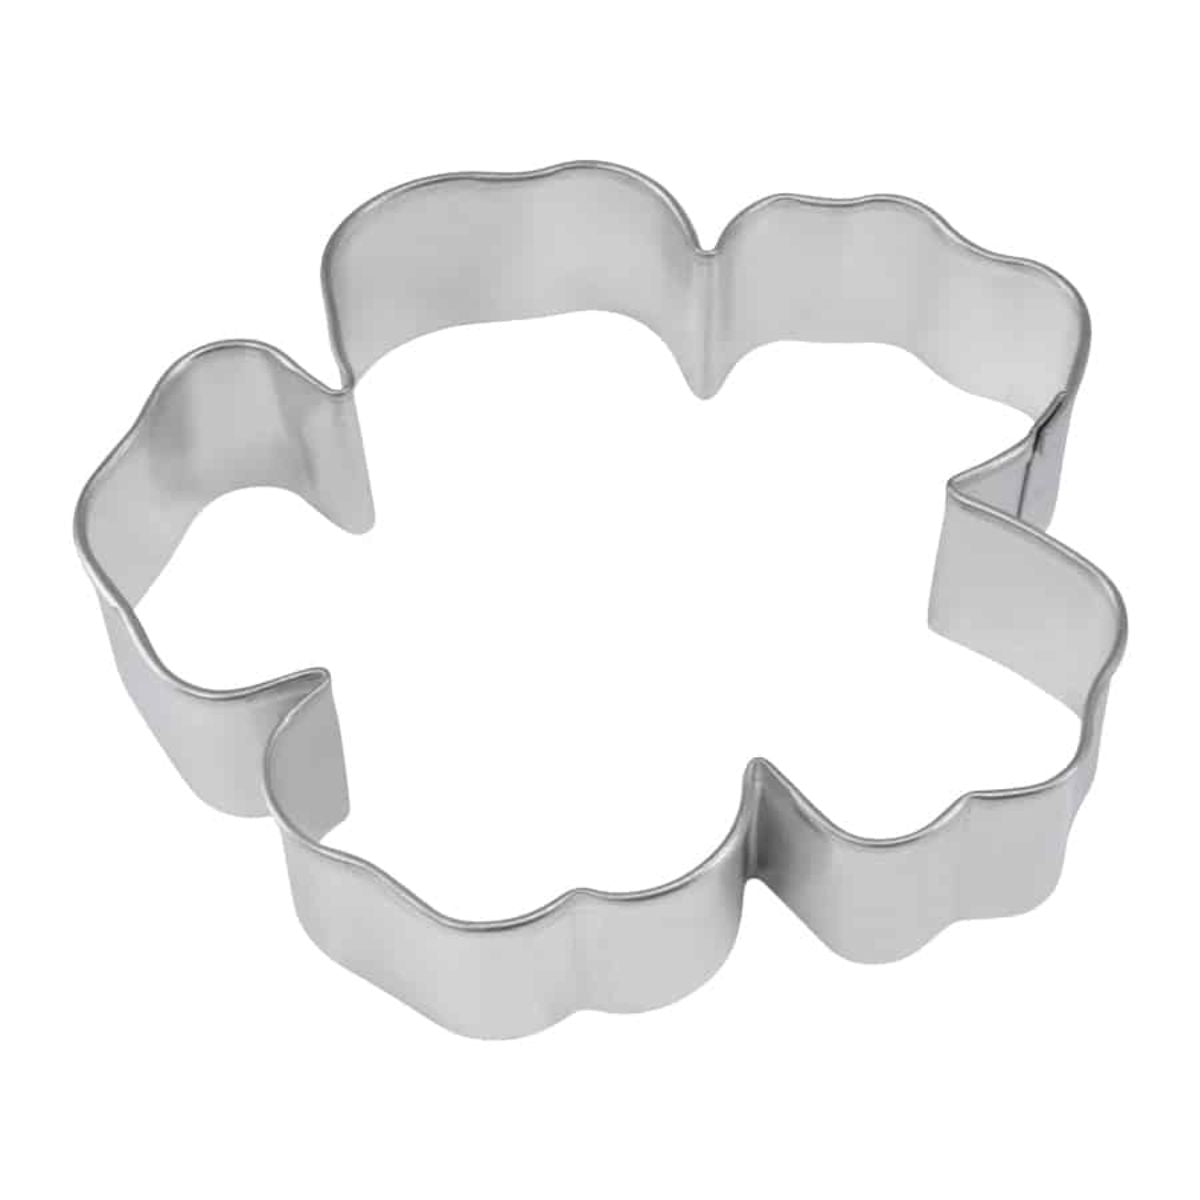 Small Daisy Cookie Cutter - Cheap Cookie Cutters